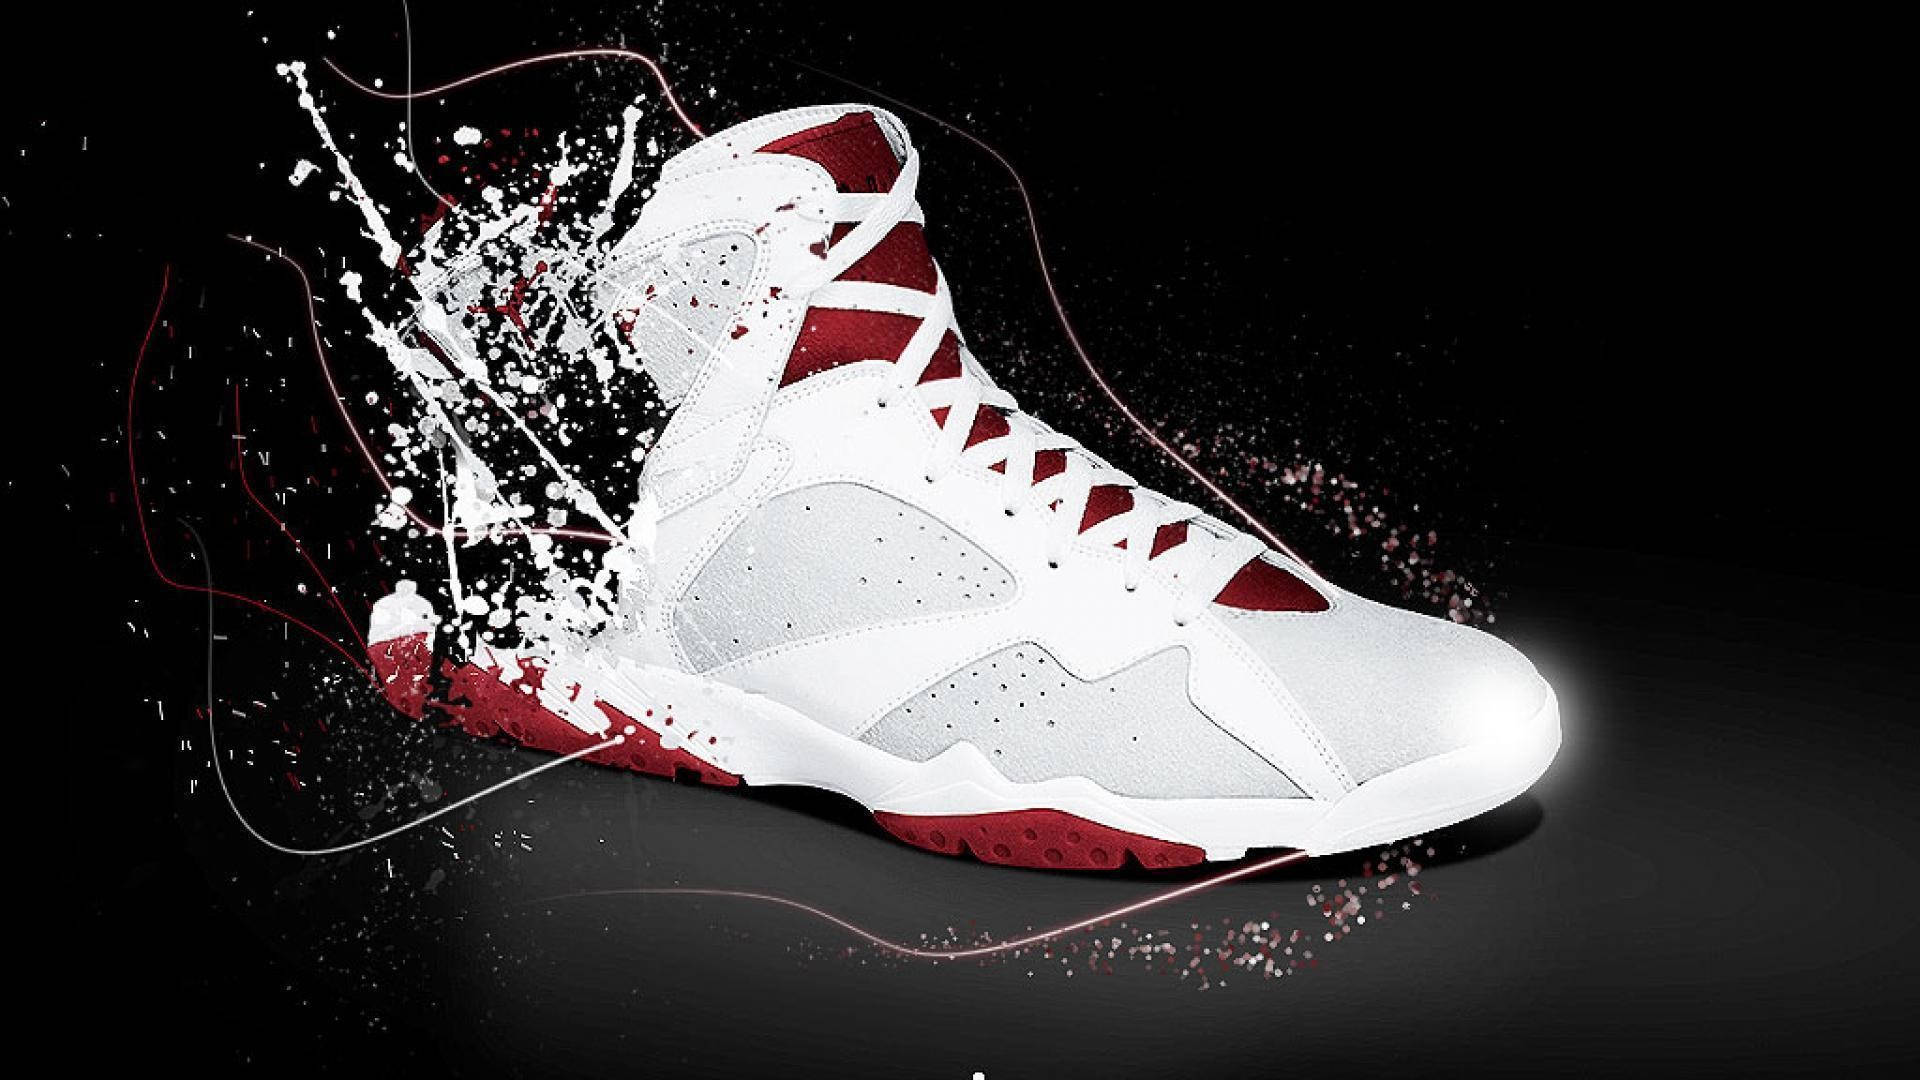 Elevate your style with the iconic Jordan Shoes Wallpaper